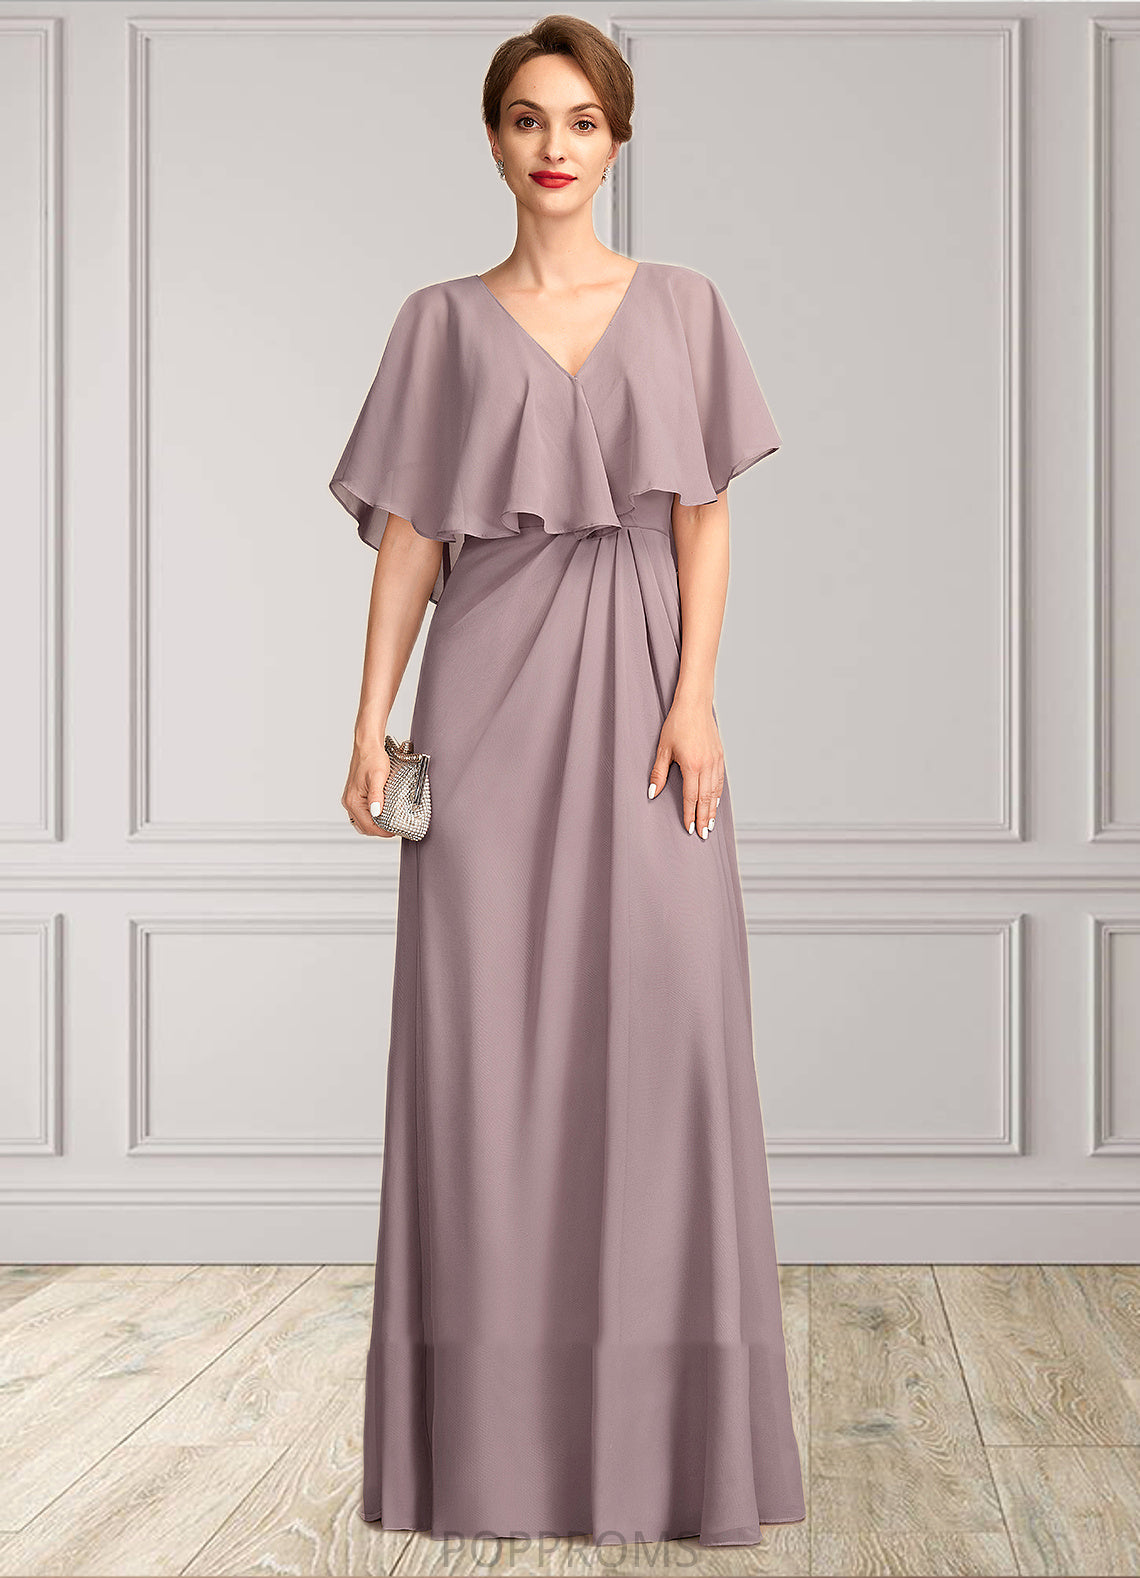 Victoria A-Line V-neck Floor-Length Chiffon Mother of the Bride Dress With Ruffle PP6126P0015026